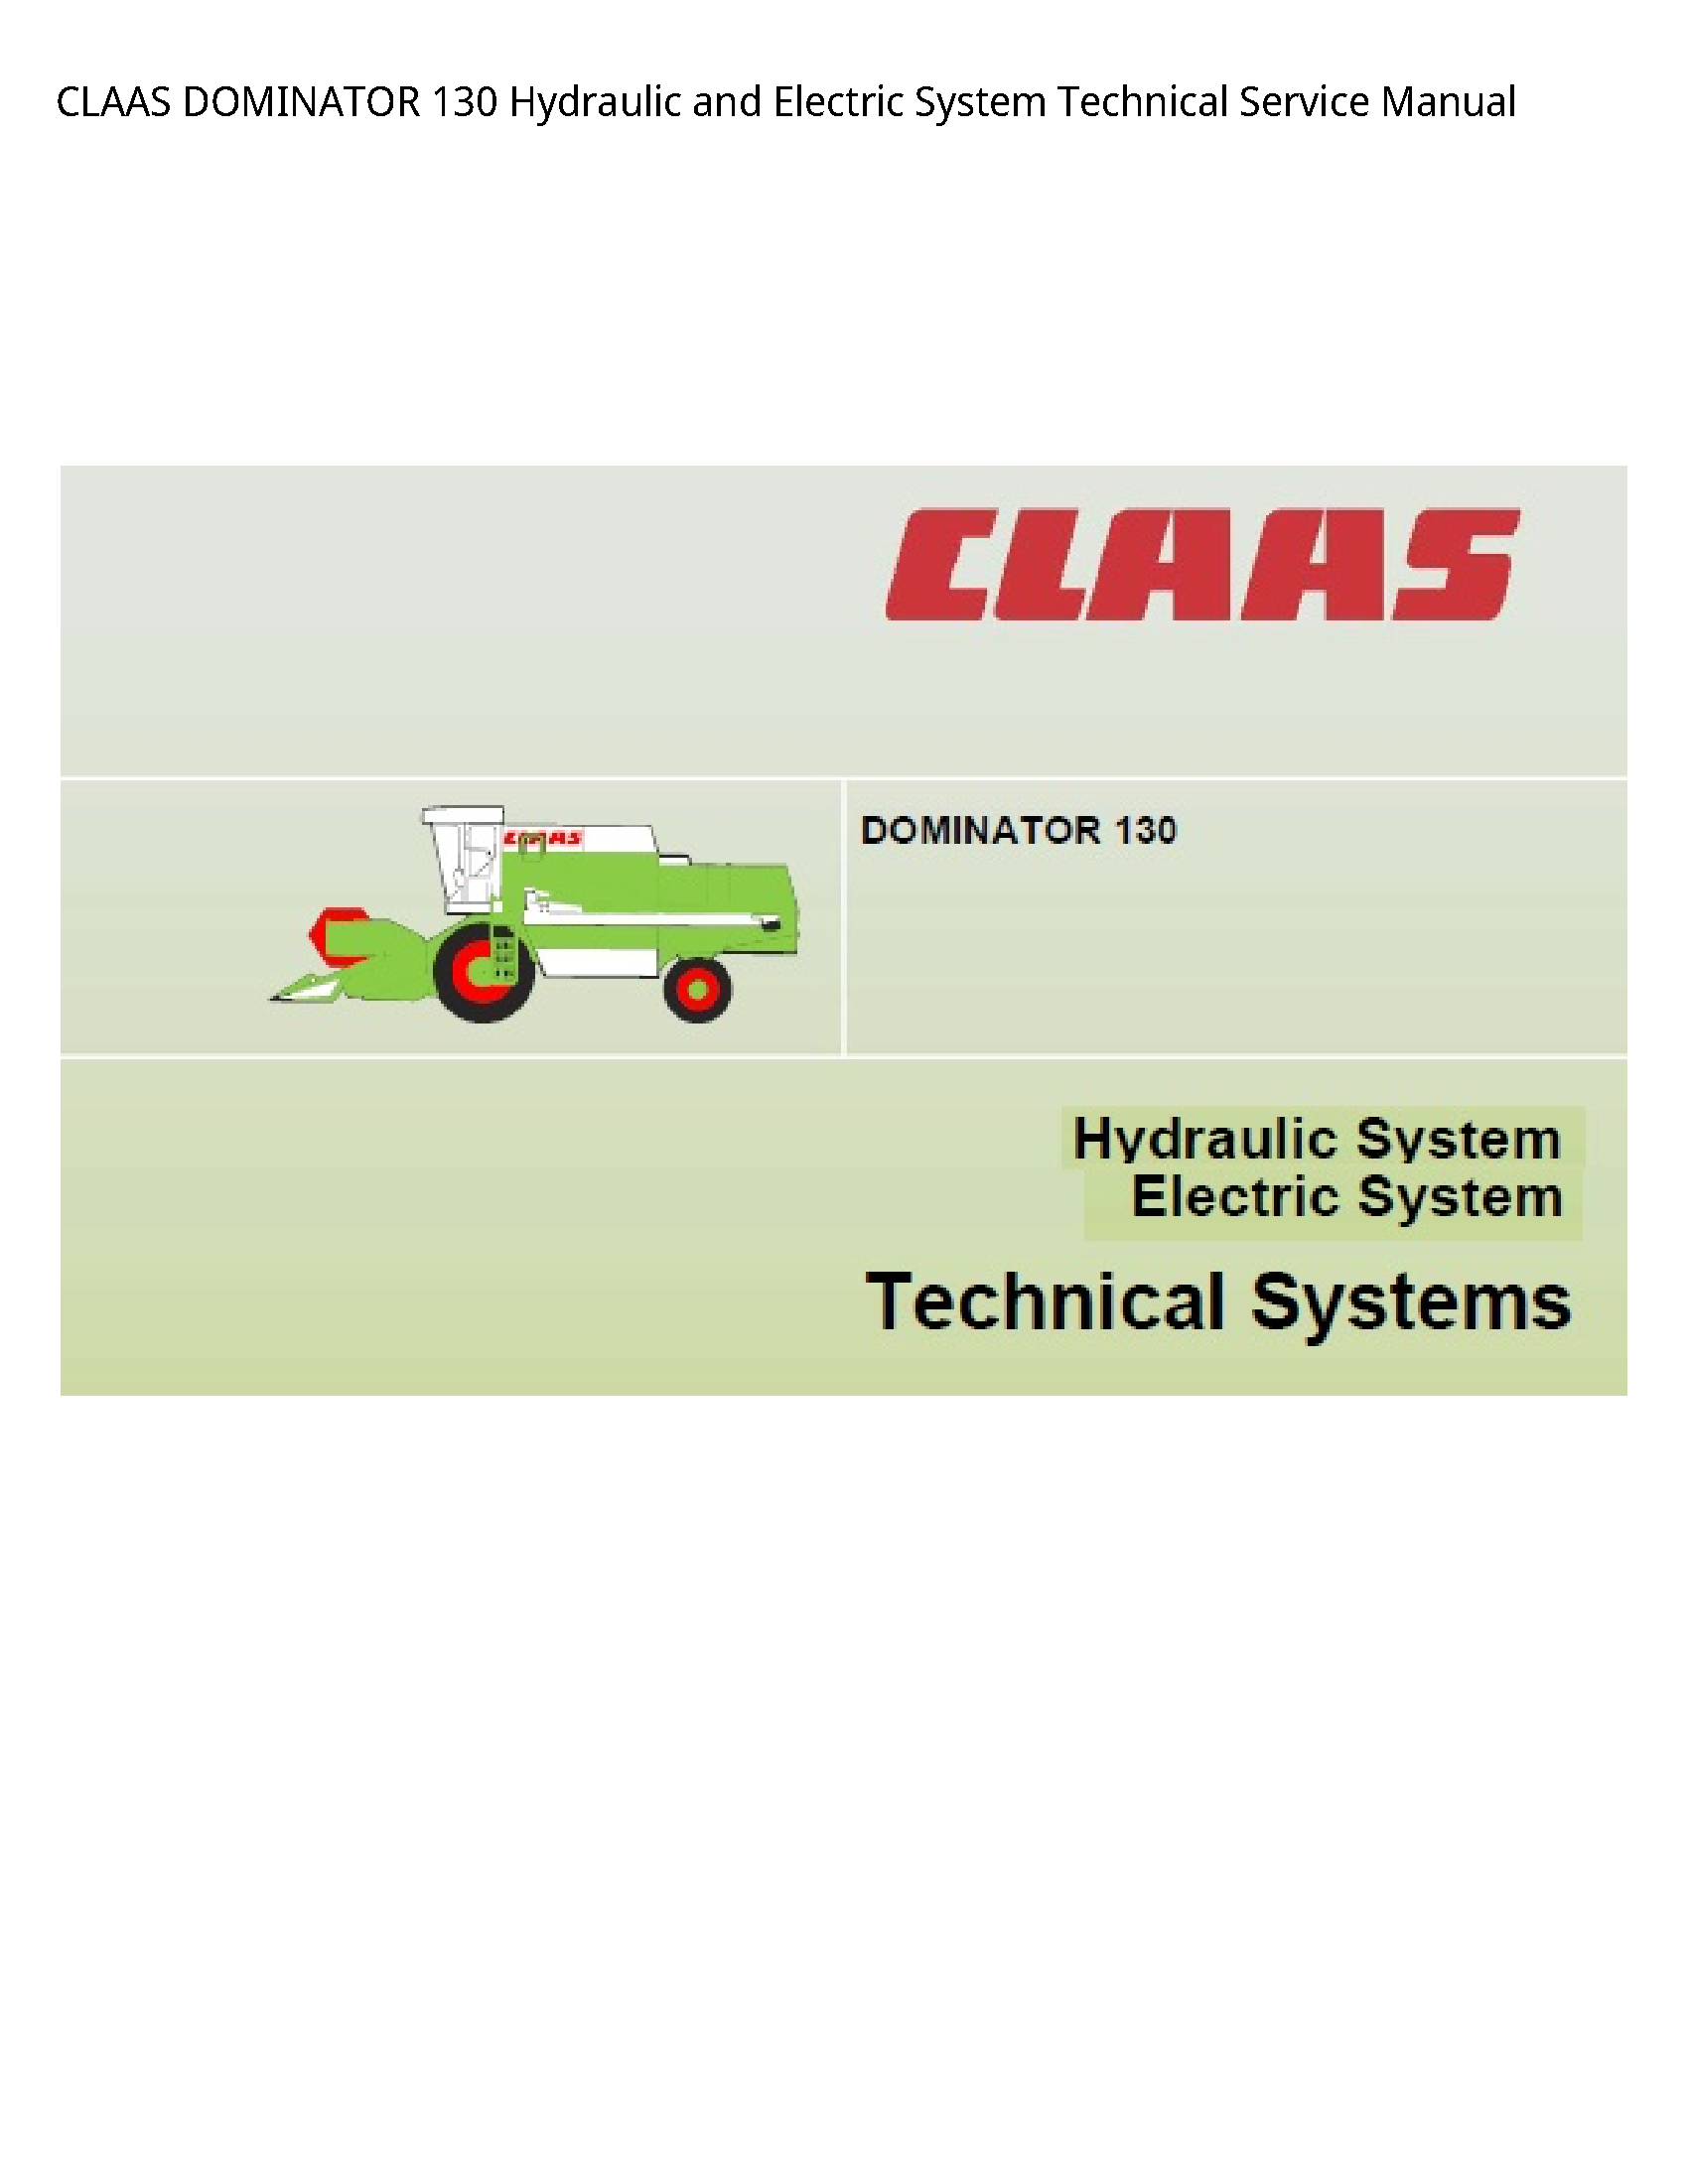 Claas 130 DOMINATOR Hydraulic  Electric System Technical Service manual